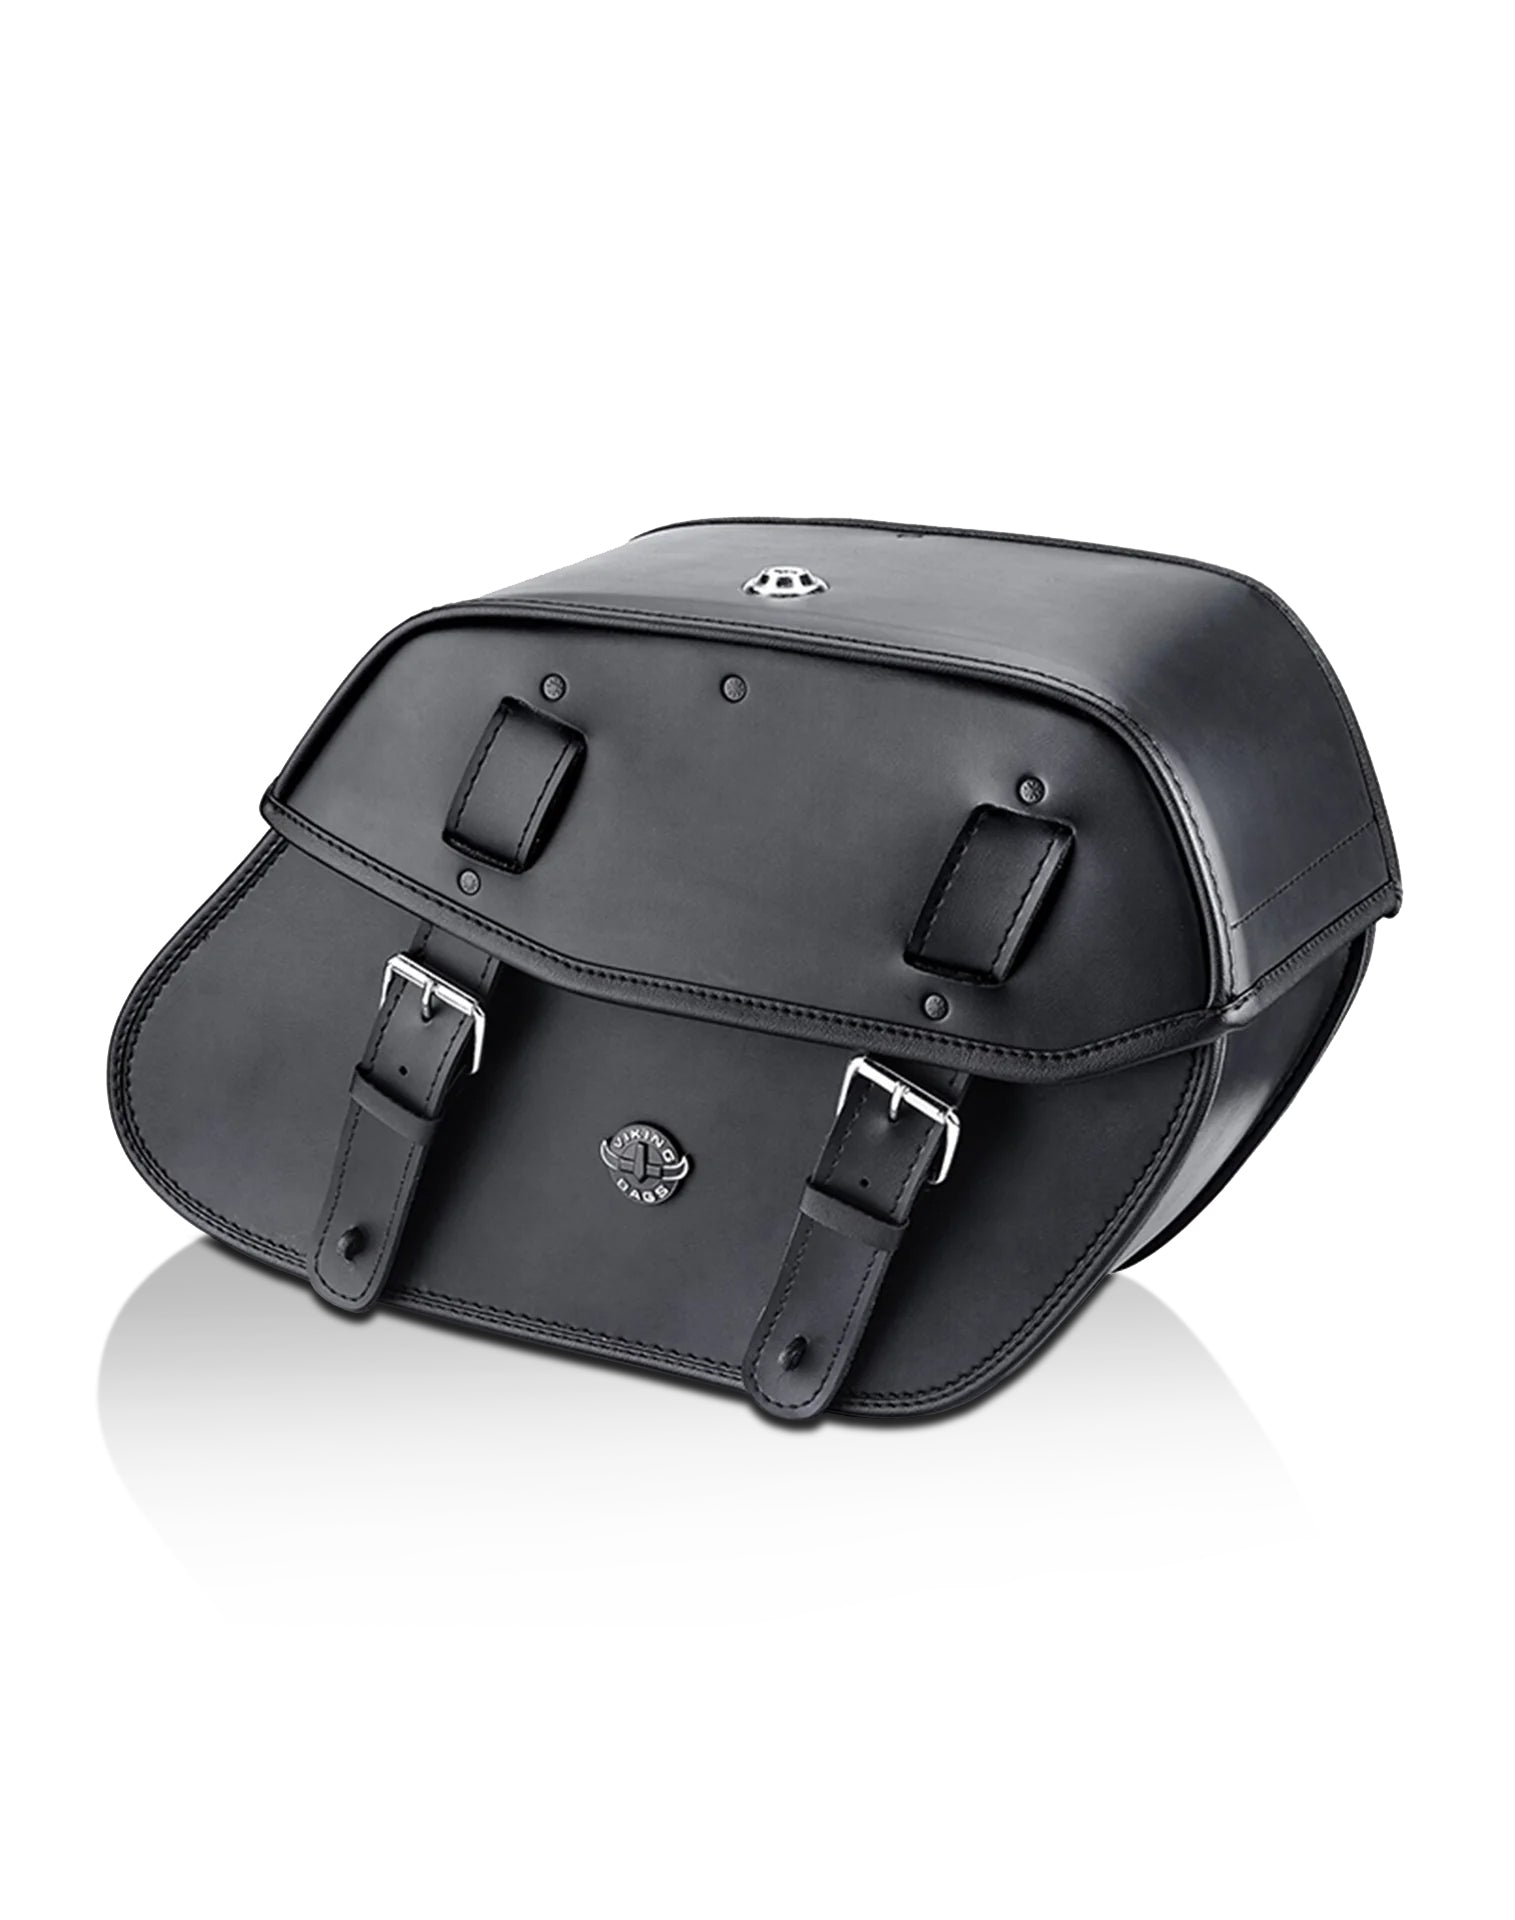 Viking Odin Large Leather Motorcycle Saddlebags For Harley Softail Sport Glide Flsb Main View